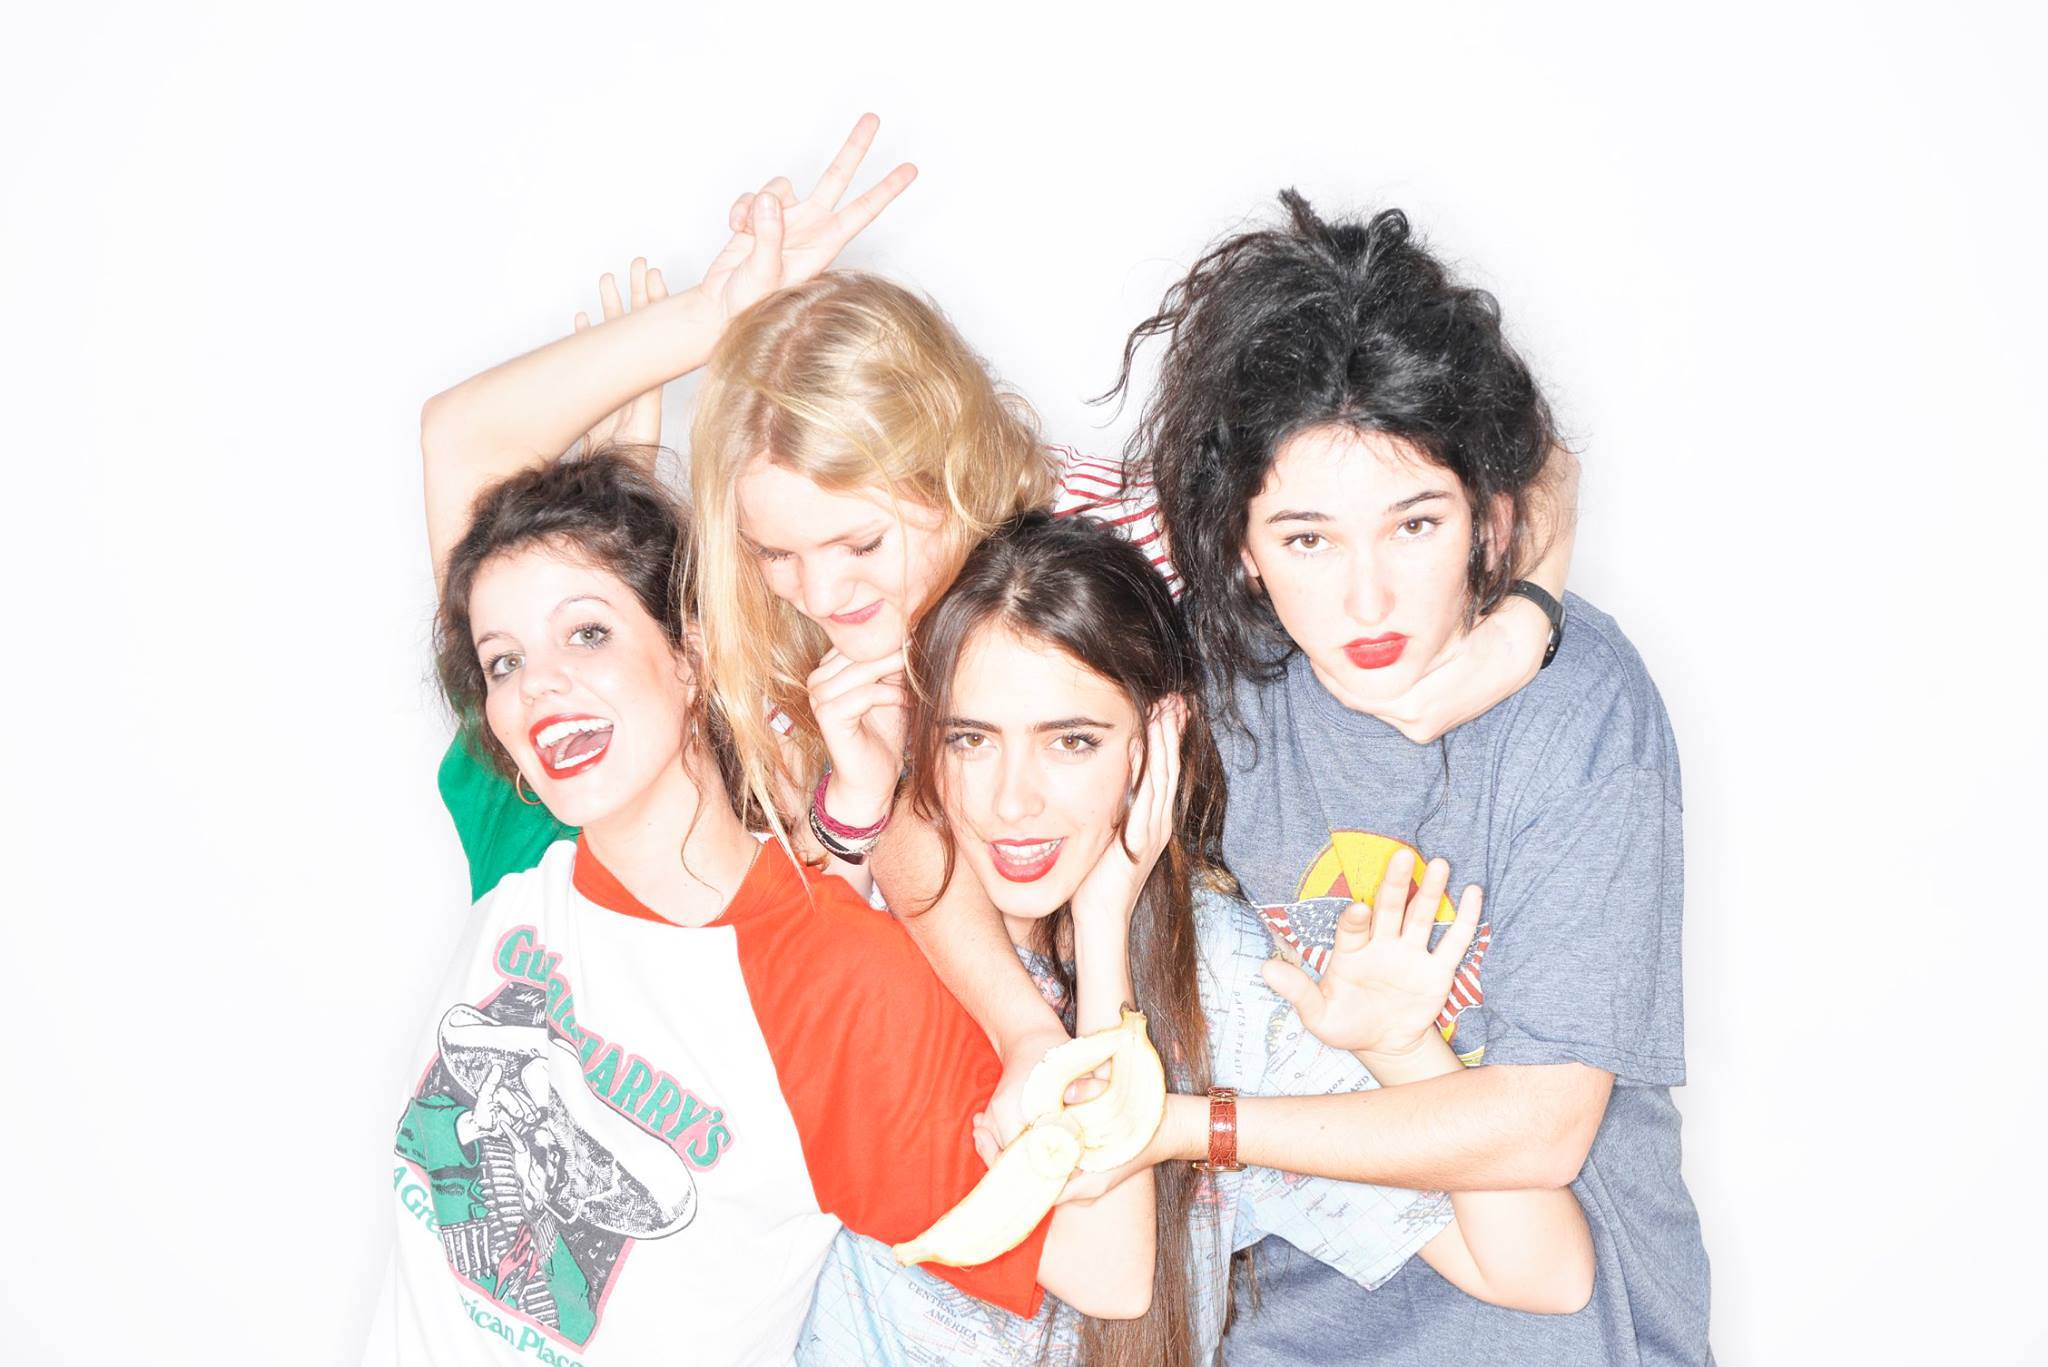 Live Review: Hinds // Music Hall of Williamsburg, New York City, 27.10.15